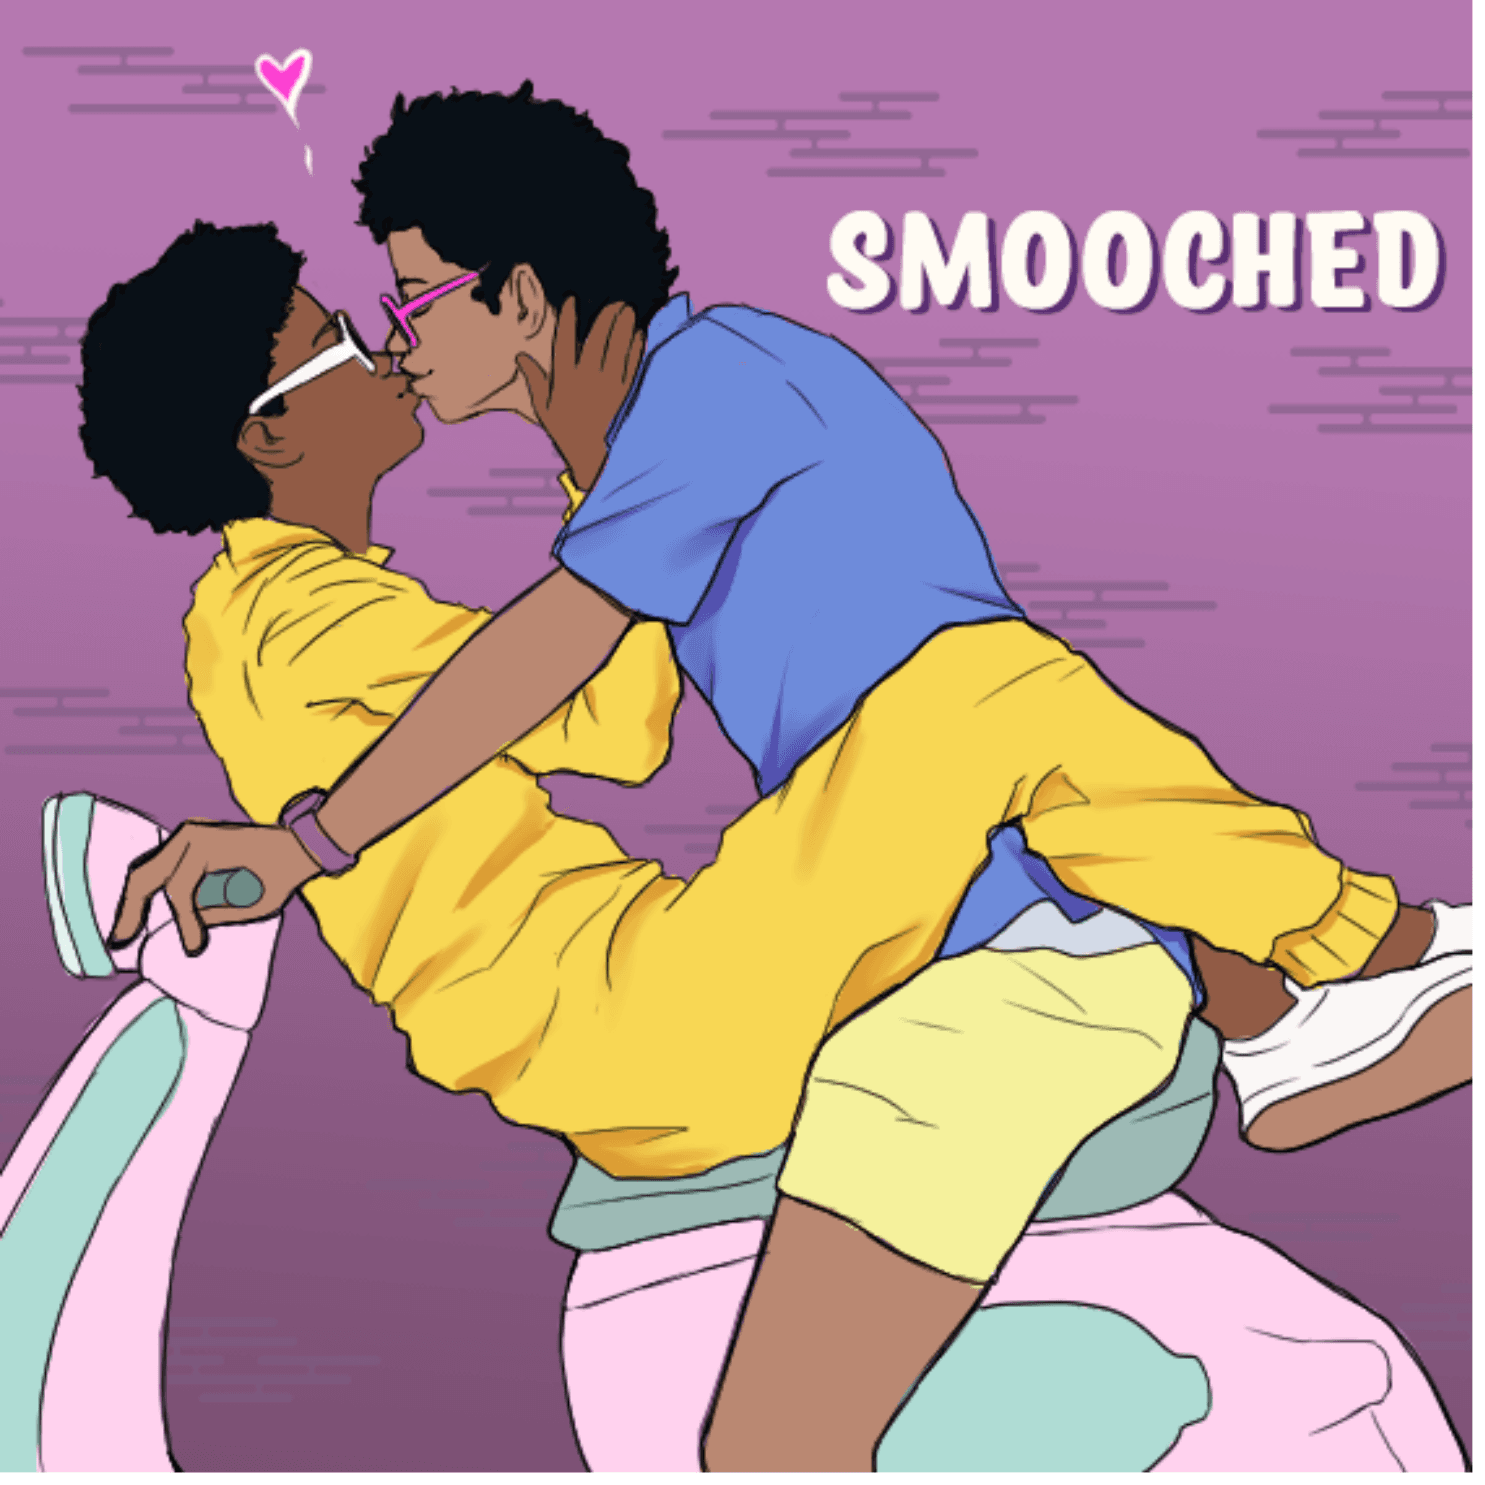 Thumbnail for "Smooched: Why You'll Never Forget Your First Kiss".